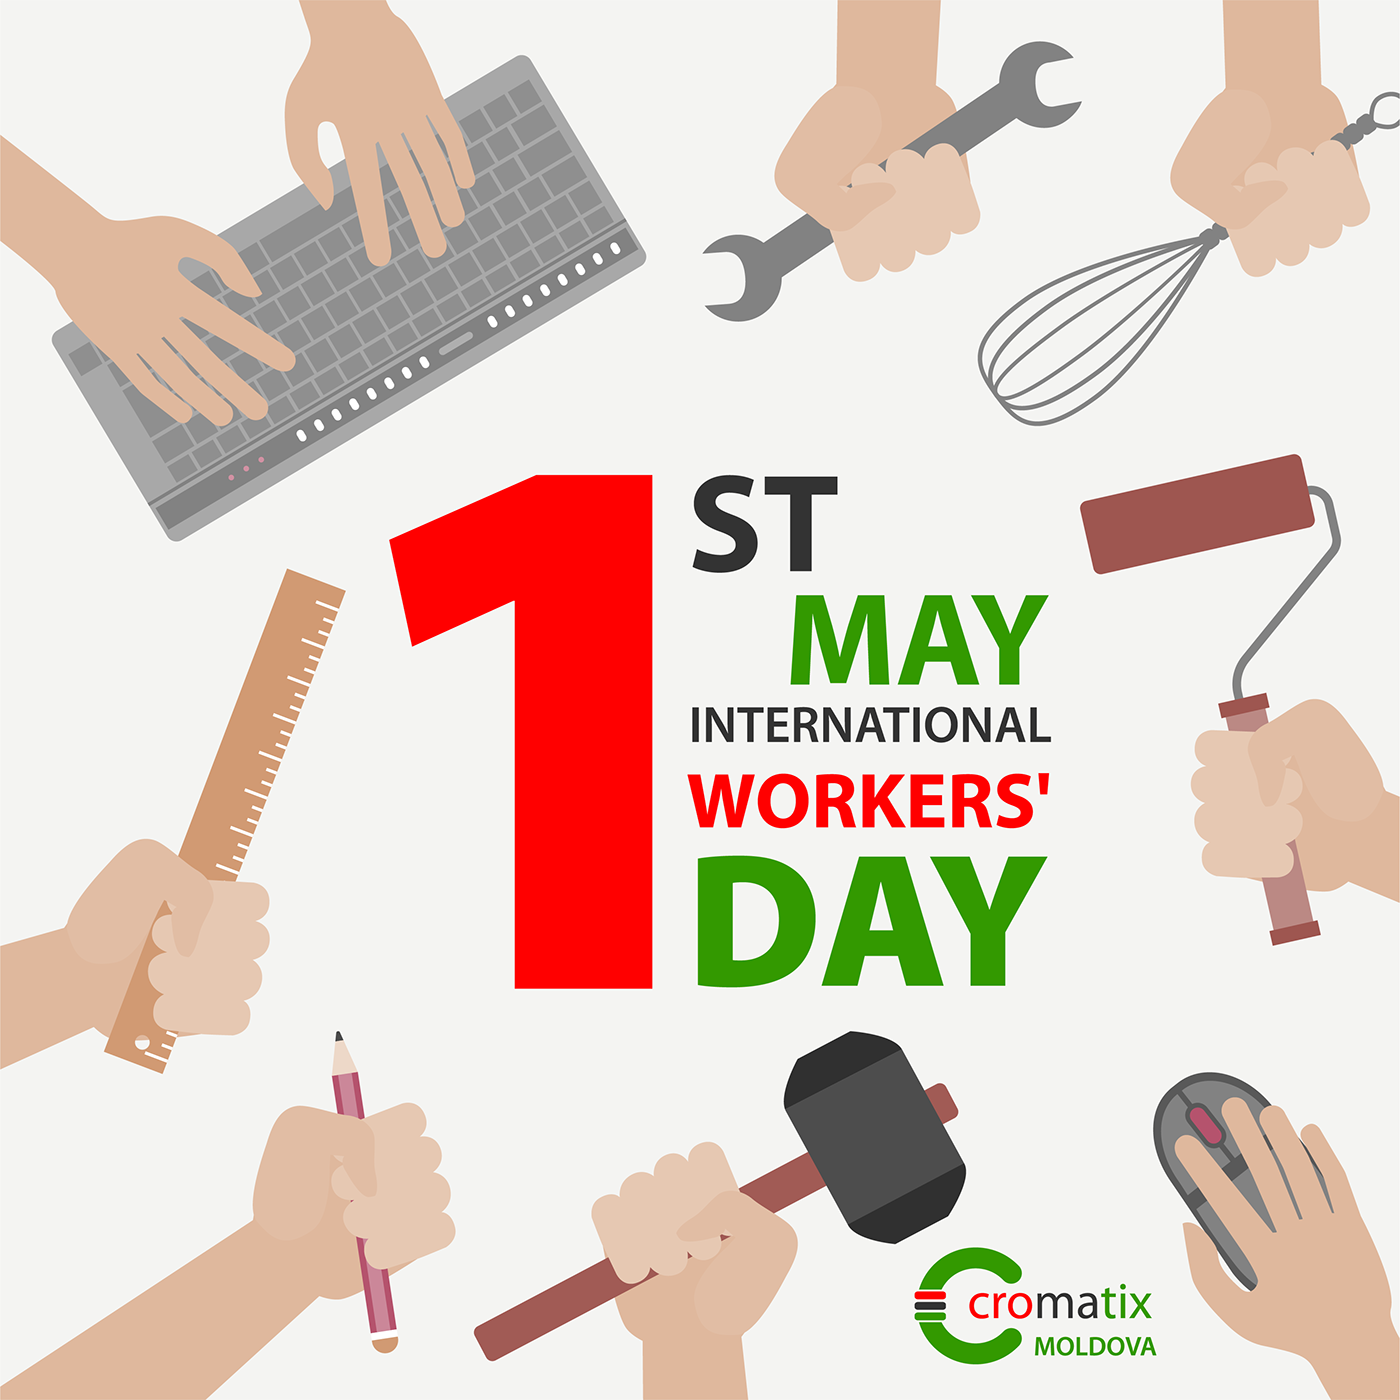 May working days. 1 May International workers' Day. 1st May Labour Day. 1 May Labour Day. International workers Day 1 мая.